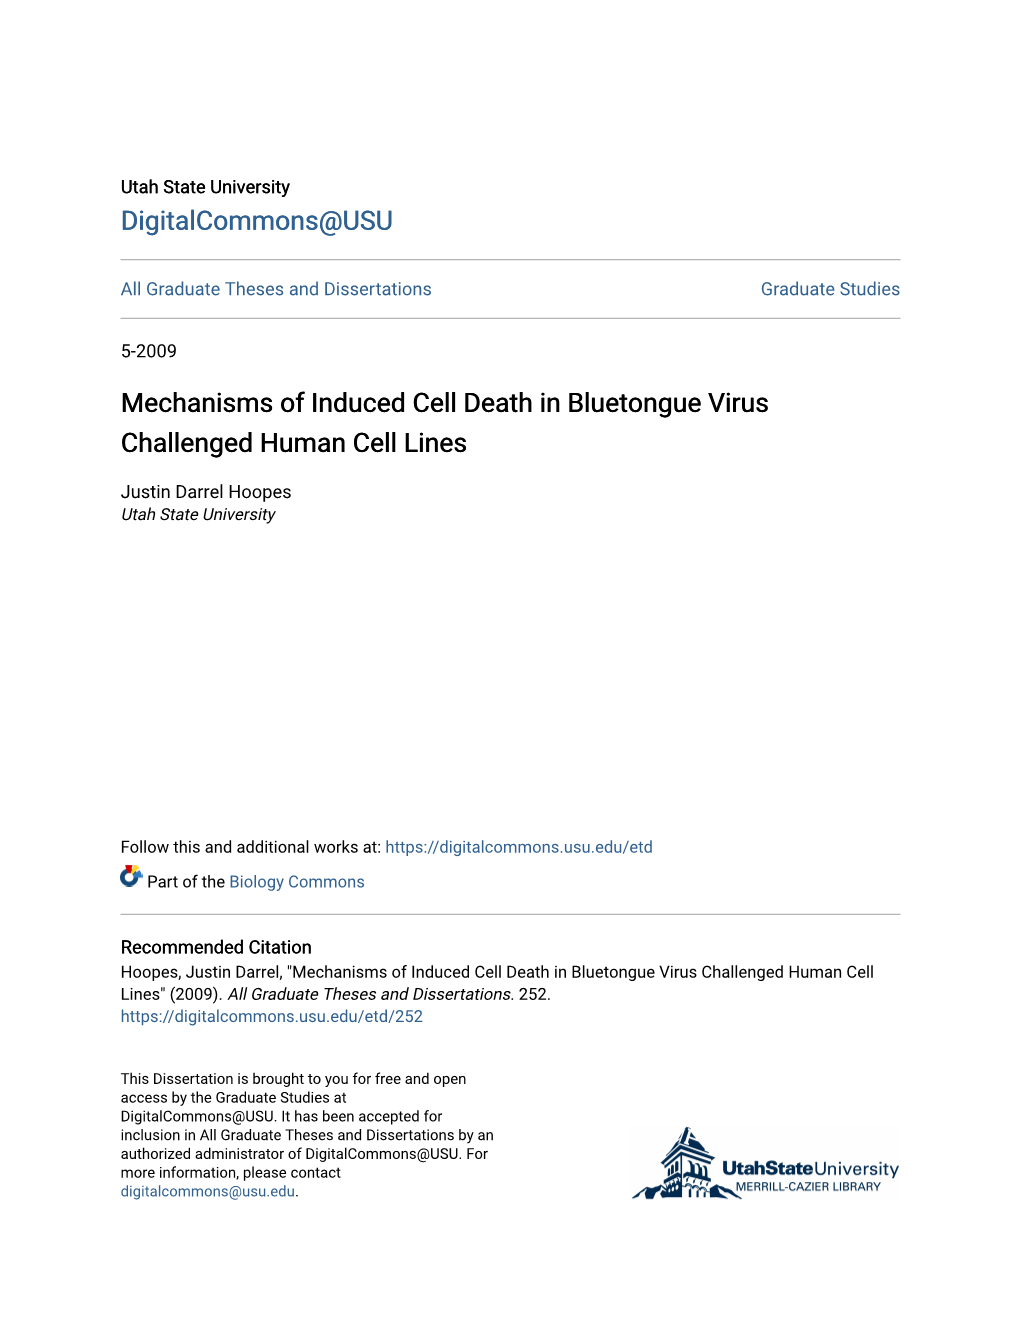 Mechanisms of Induced Cell Death in Bluetongue Virus Challenged Human Cell Lines